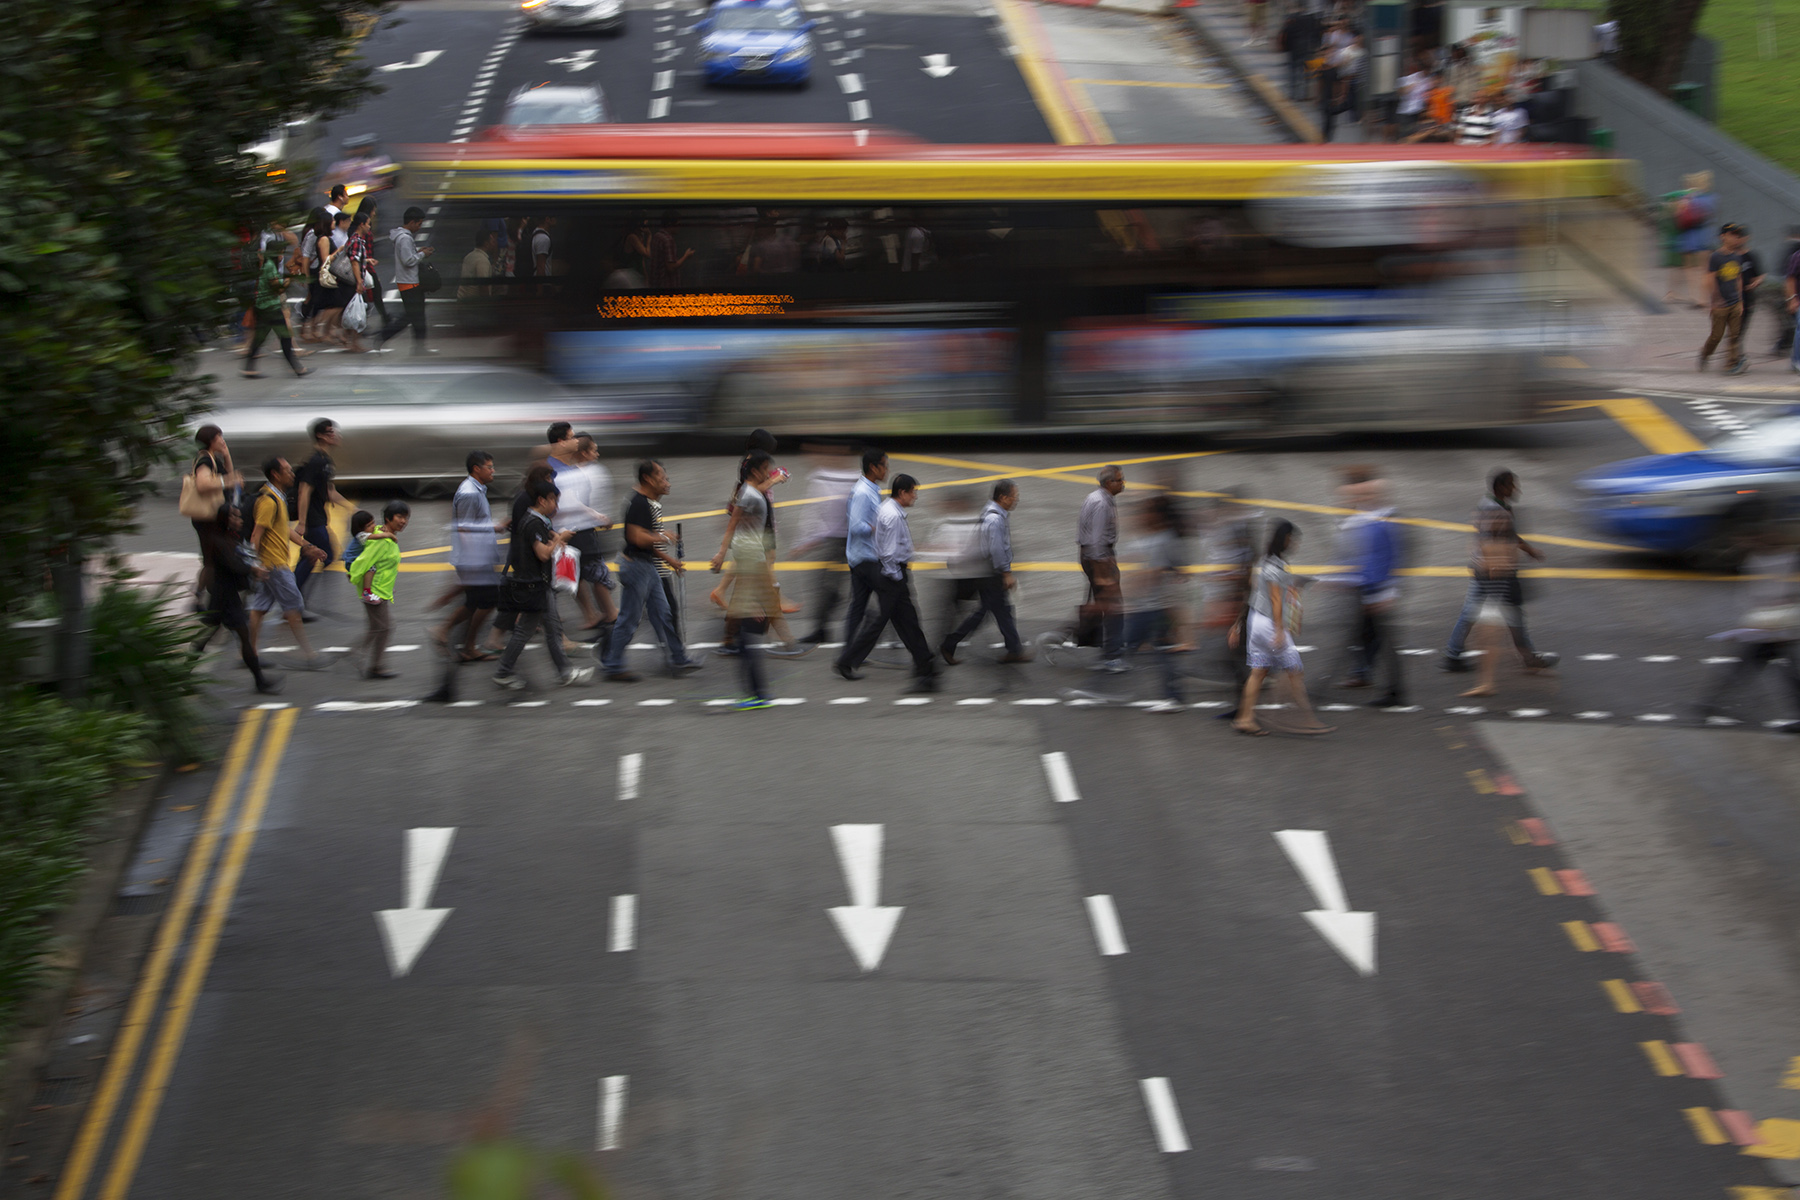 Movement blur of bus in background as people cross a busy street in Singapore